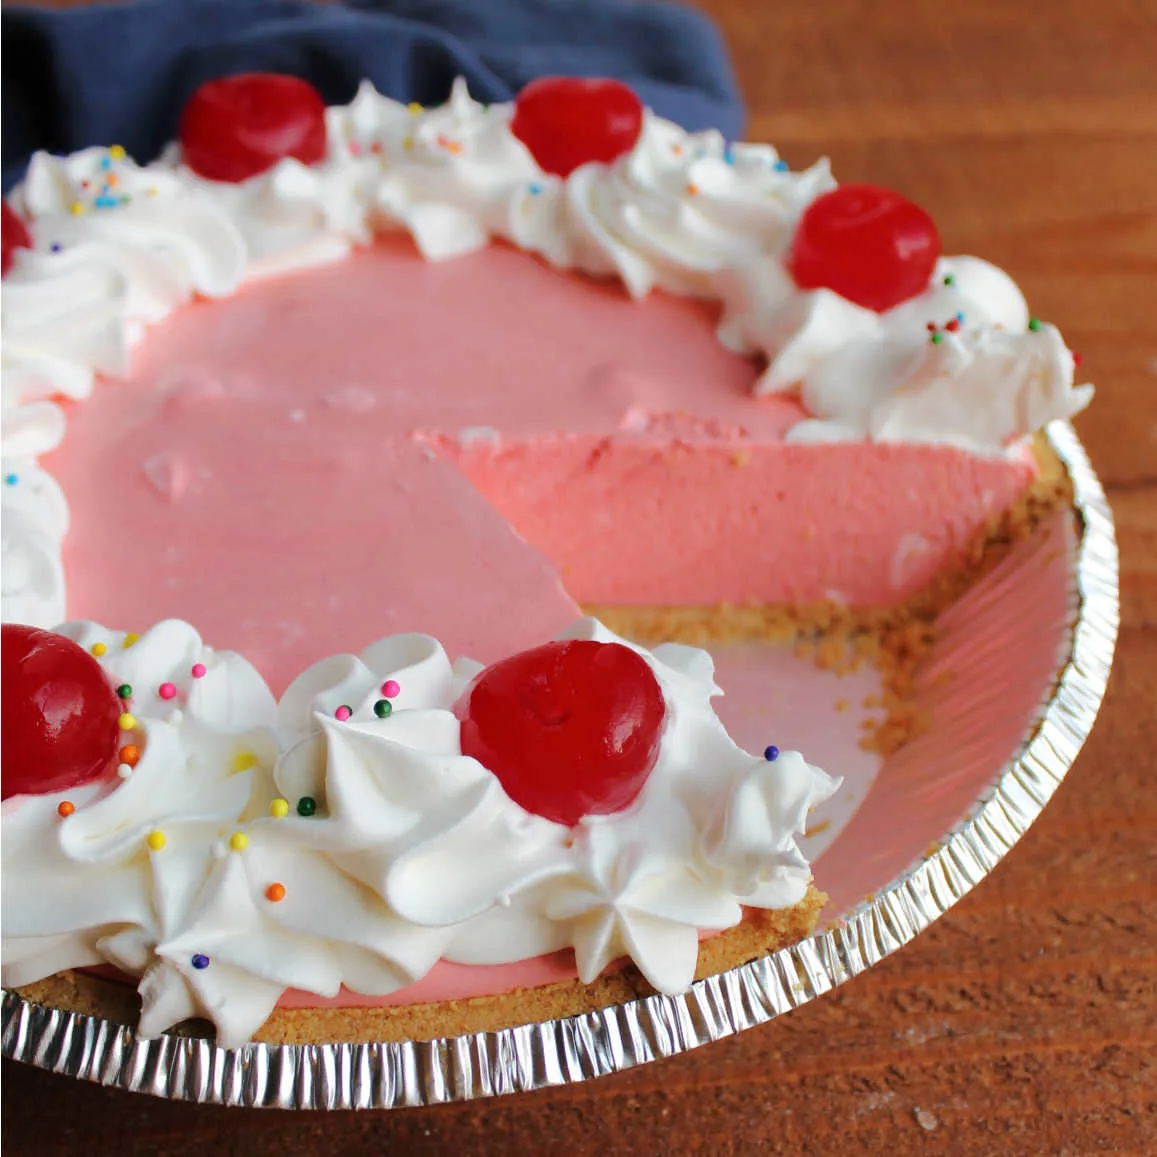 Pie plate with pink jello pie inside with a piece missing.